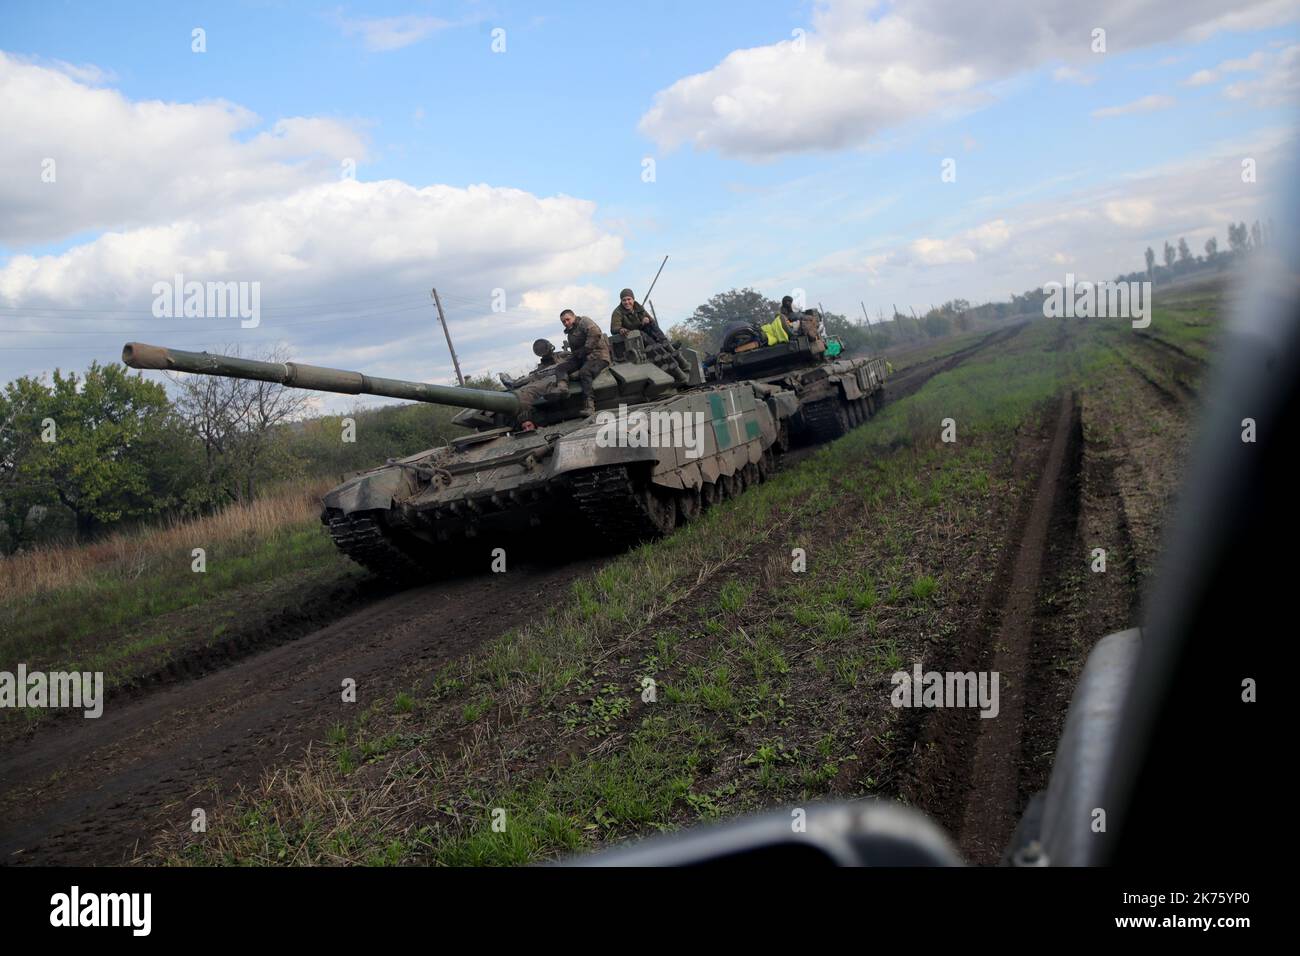 KHARKIV, UKRAINE - OCTOBER 13, 2022 - Servicemen are seen at the firing position of the artillery of the Armed Forces of Ukraine, Kharkiv Region, northeastern Ukraine. This photo cannot be distributed in the russian federation. Stock Photo